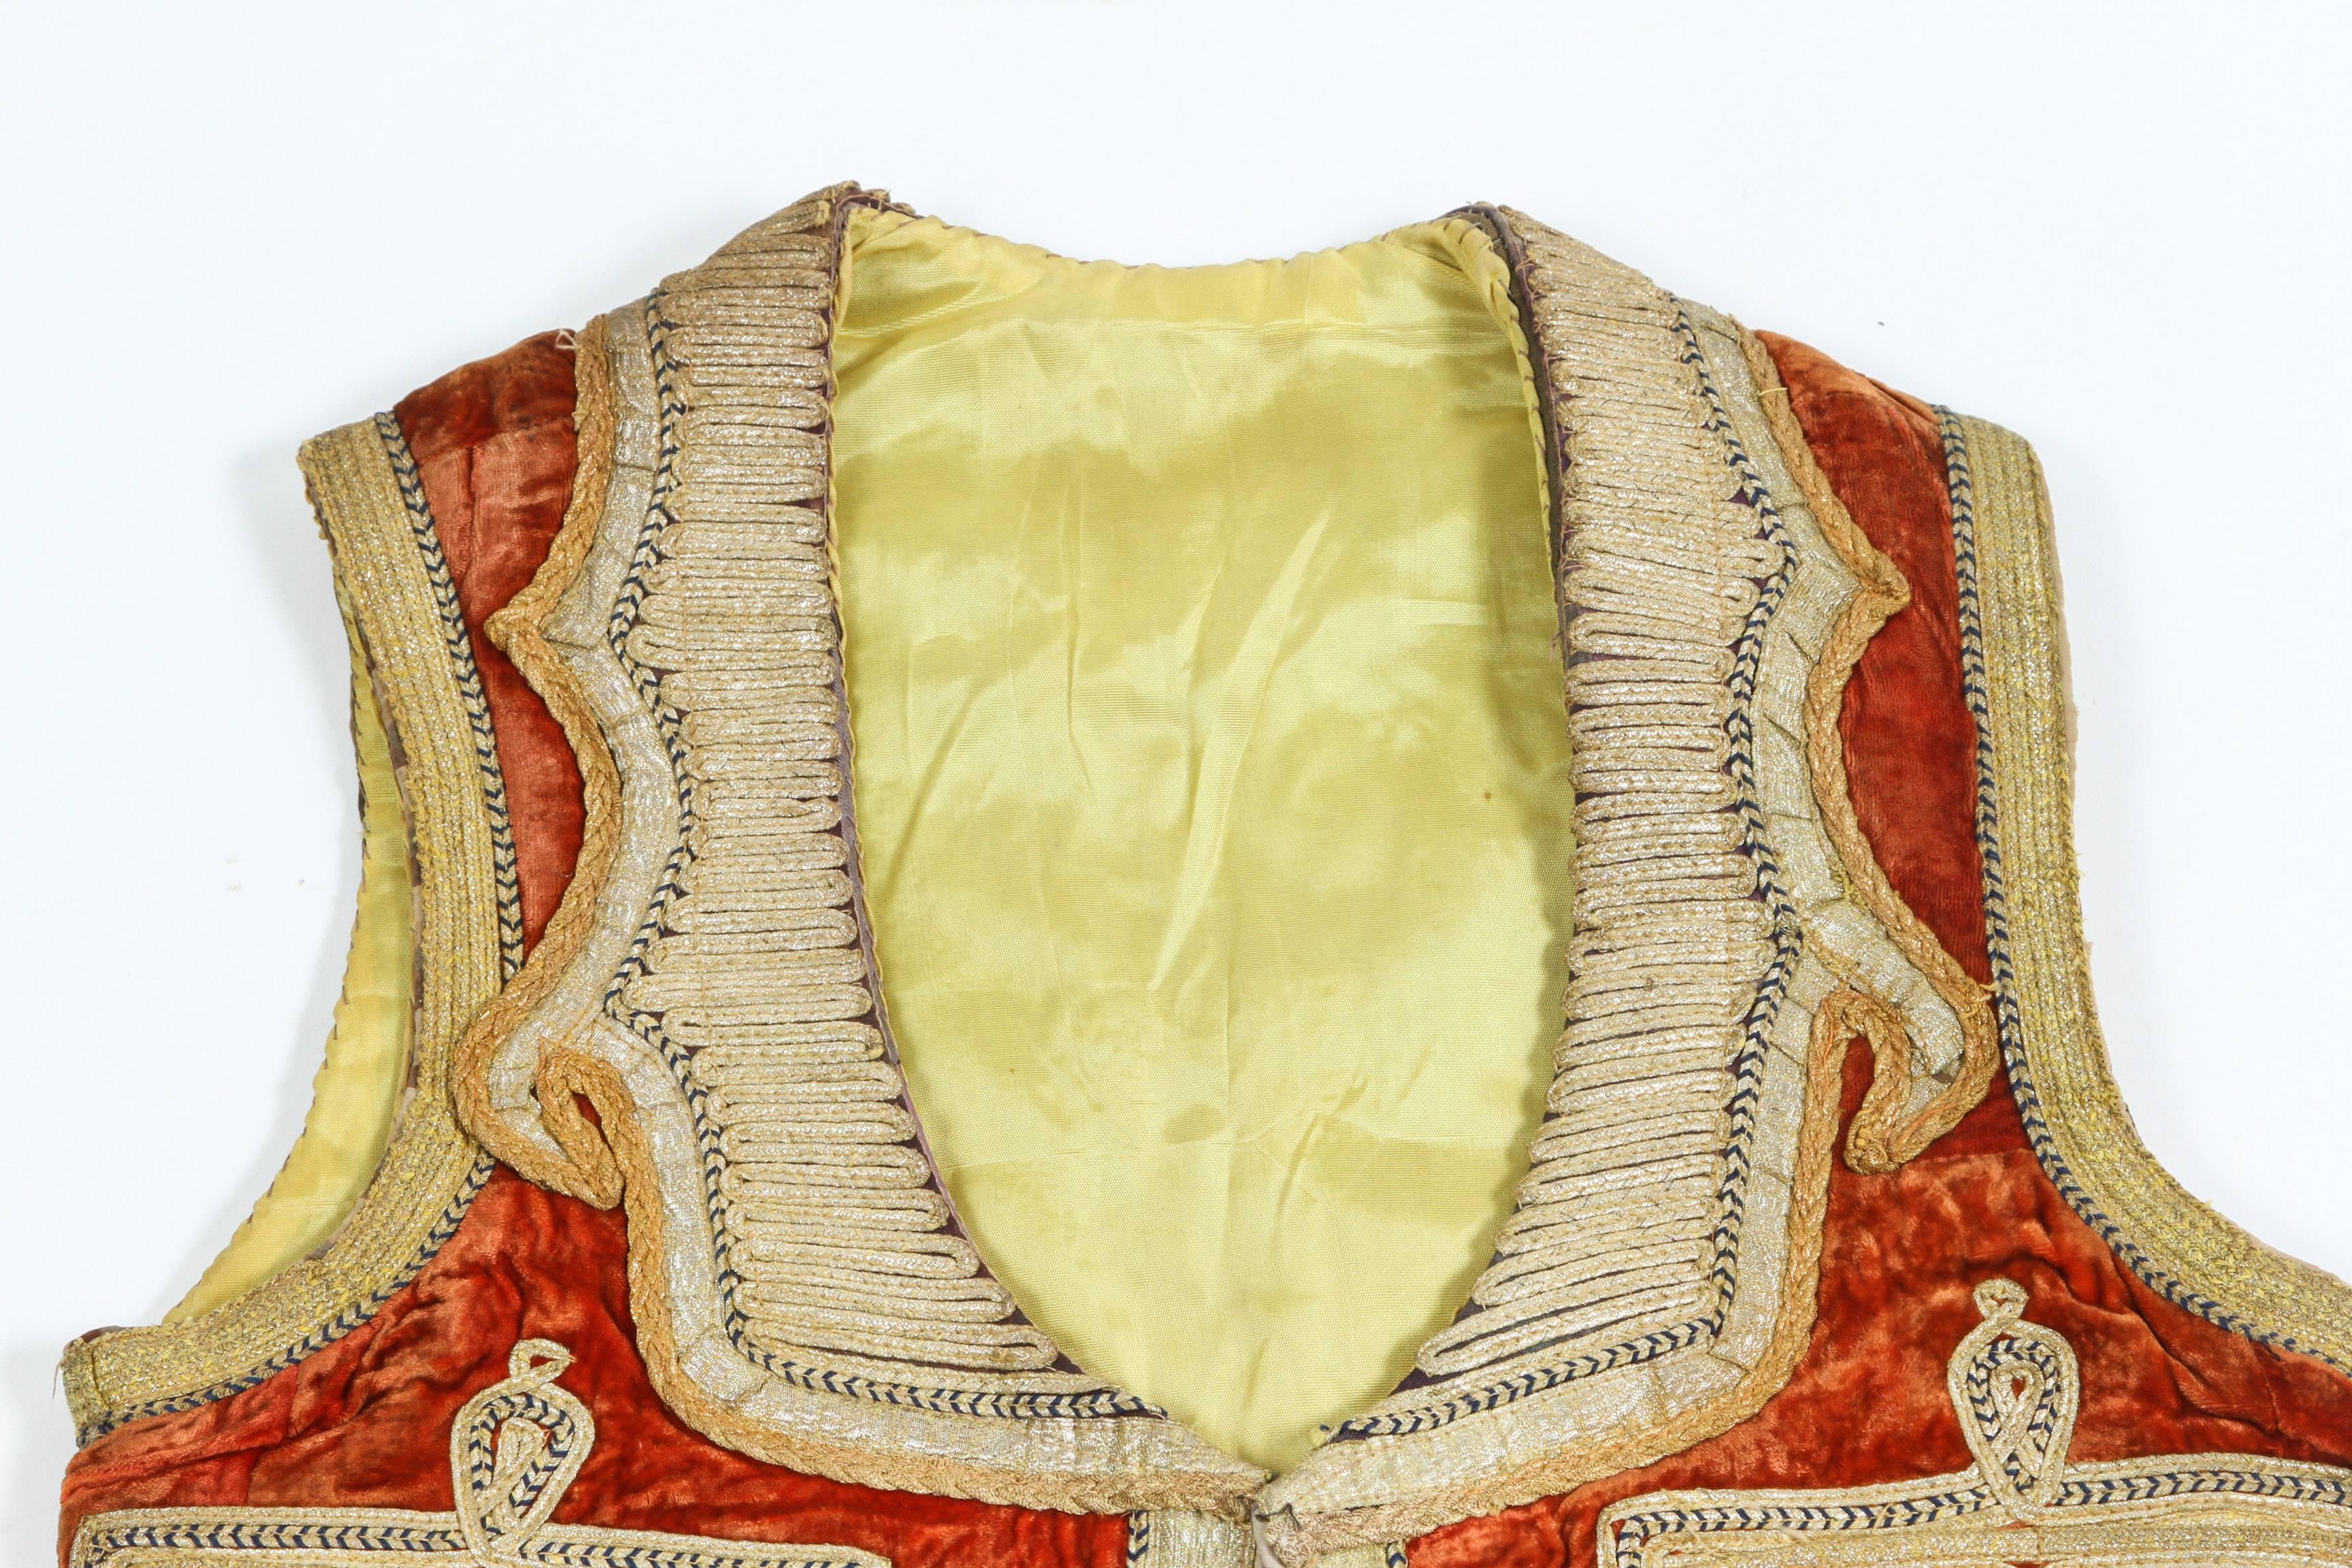 Authentic late 19th century antique ottoman Turkish vest in red velvet decorated with elaborate gold thread, trimmed with gold metallic thread.
Elegant vest handmade embroidery on red velvet, fully lined with gold yellow silk and fabric.
This